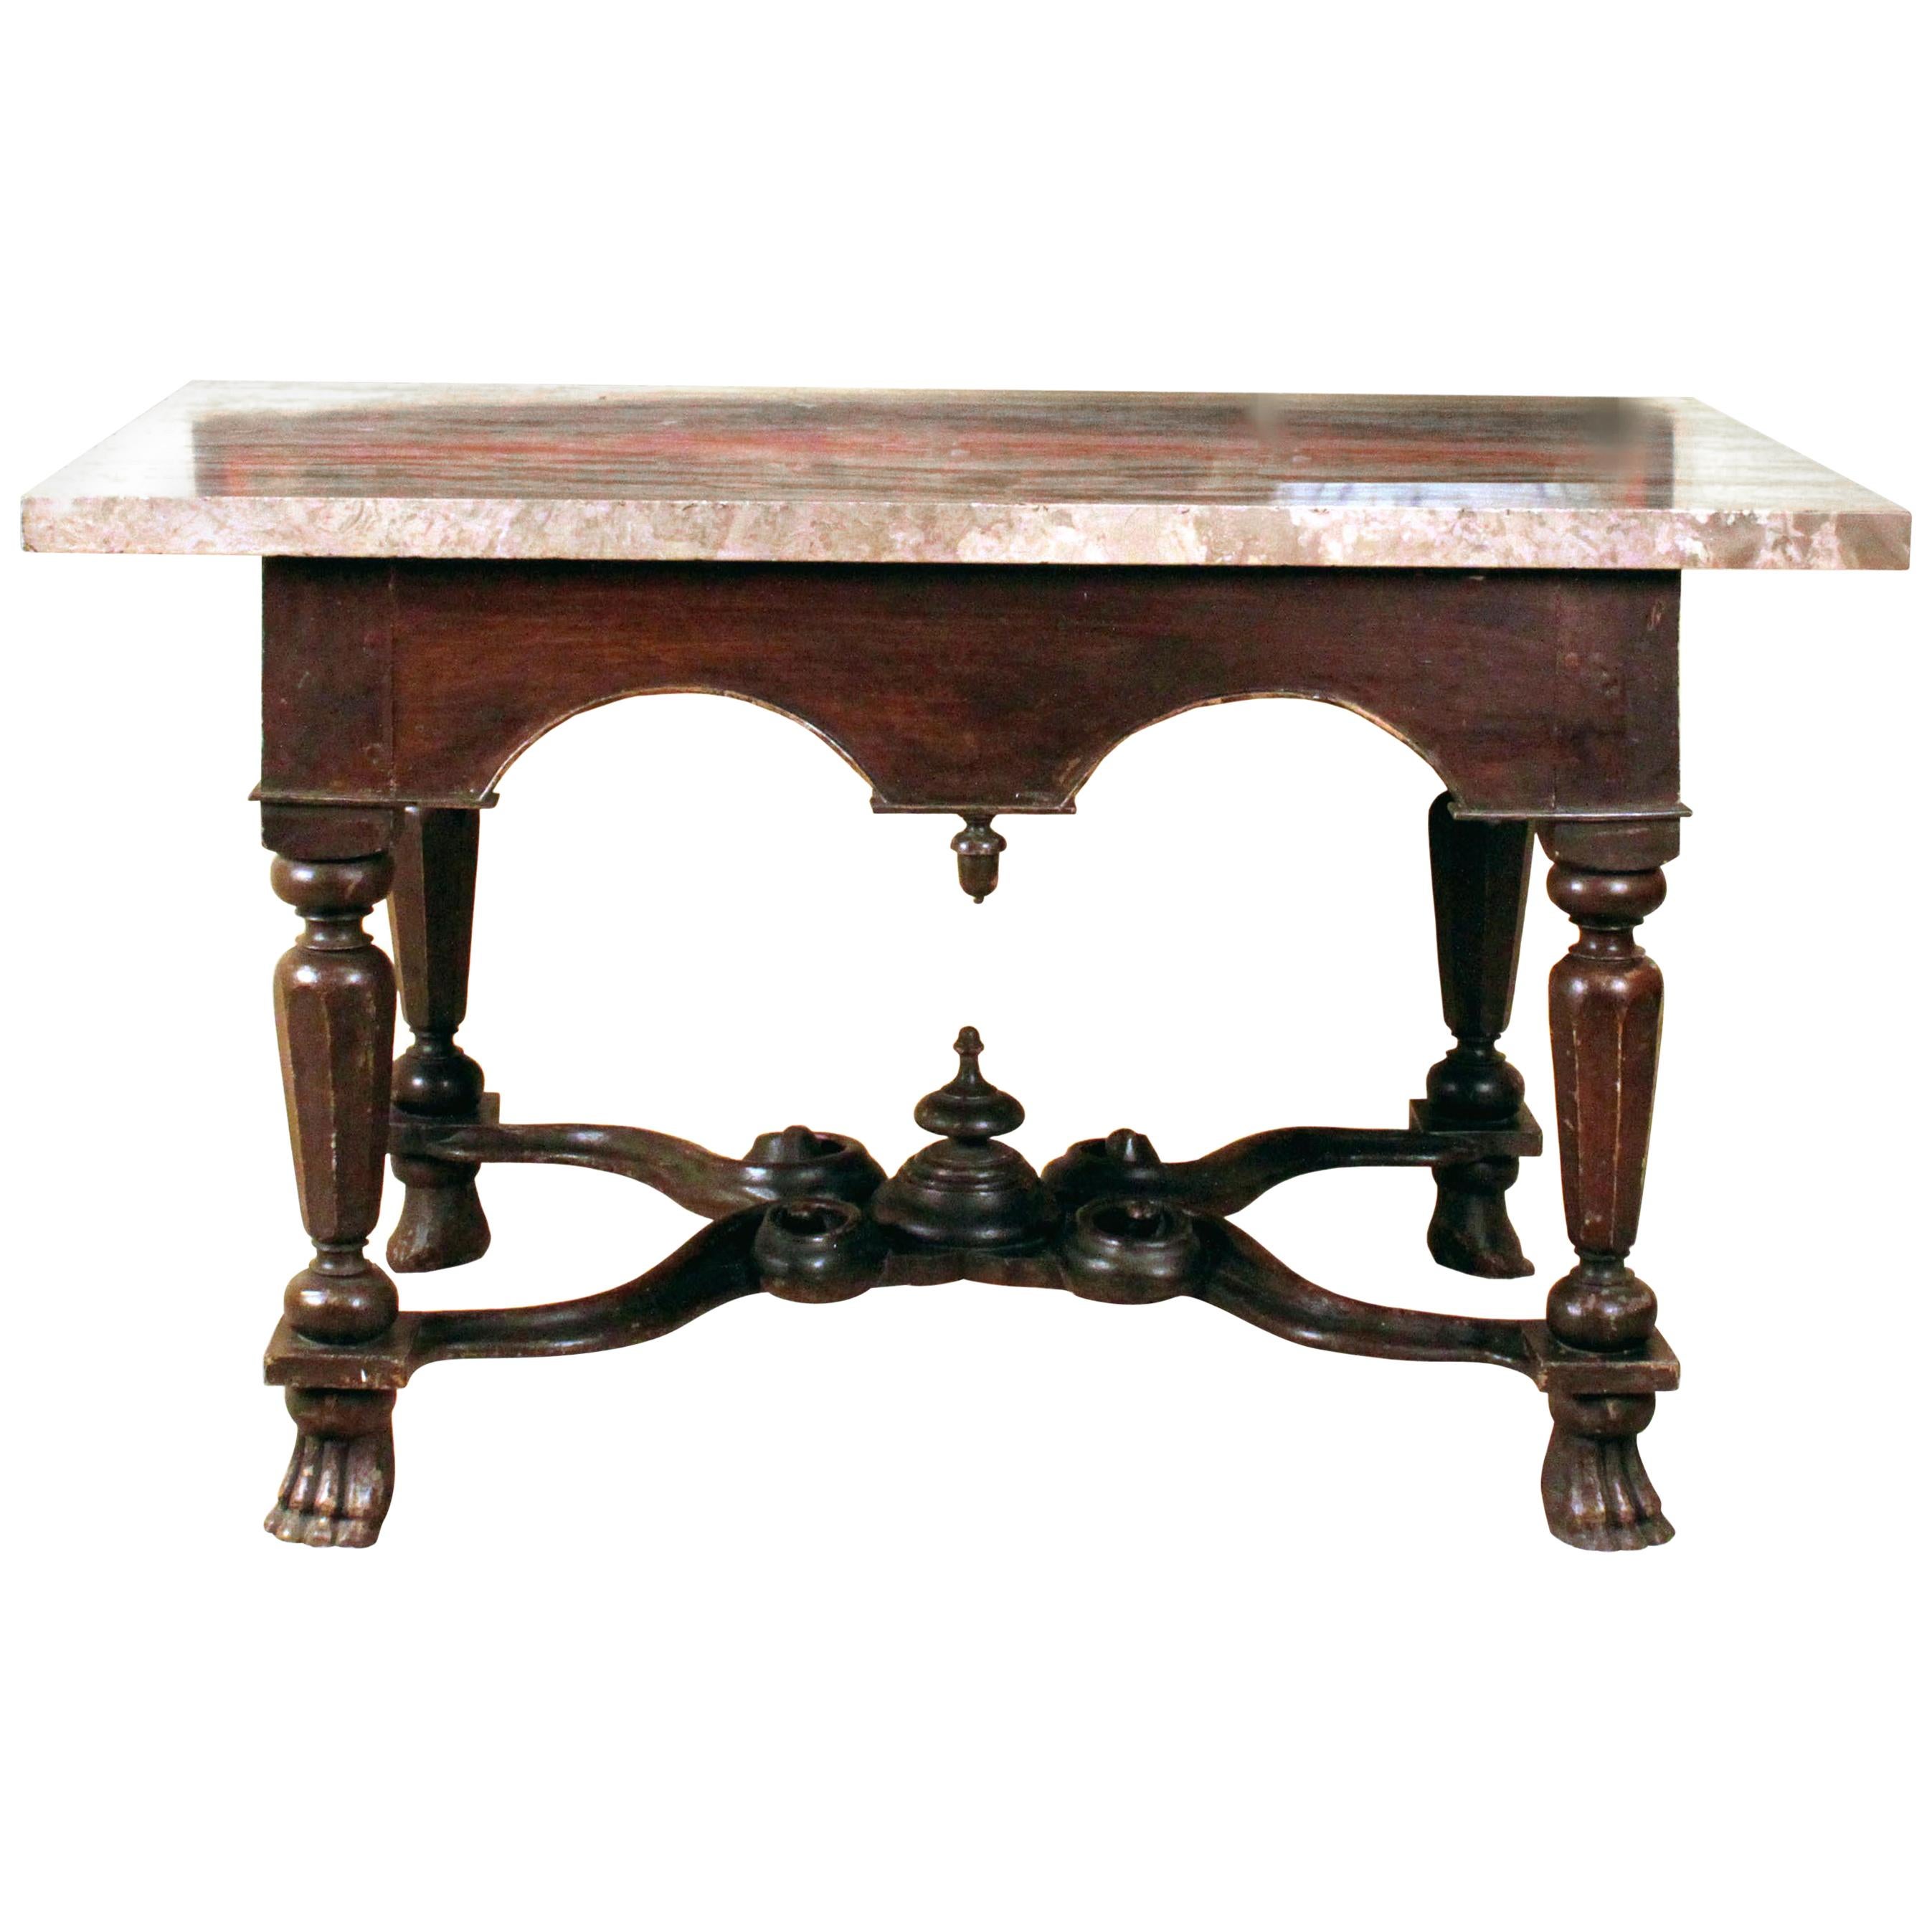 William & Mary X Stretcher Antique Pier Table